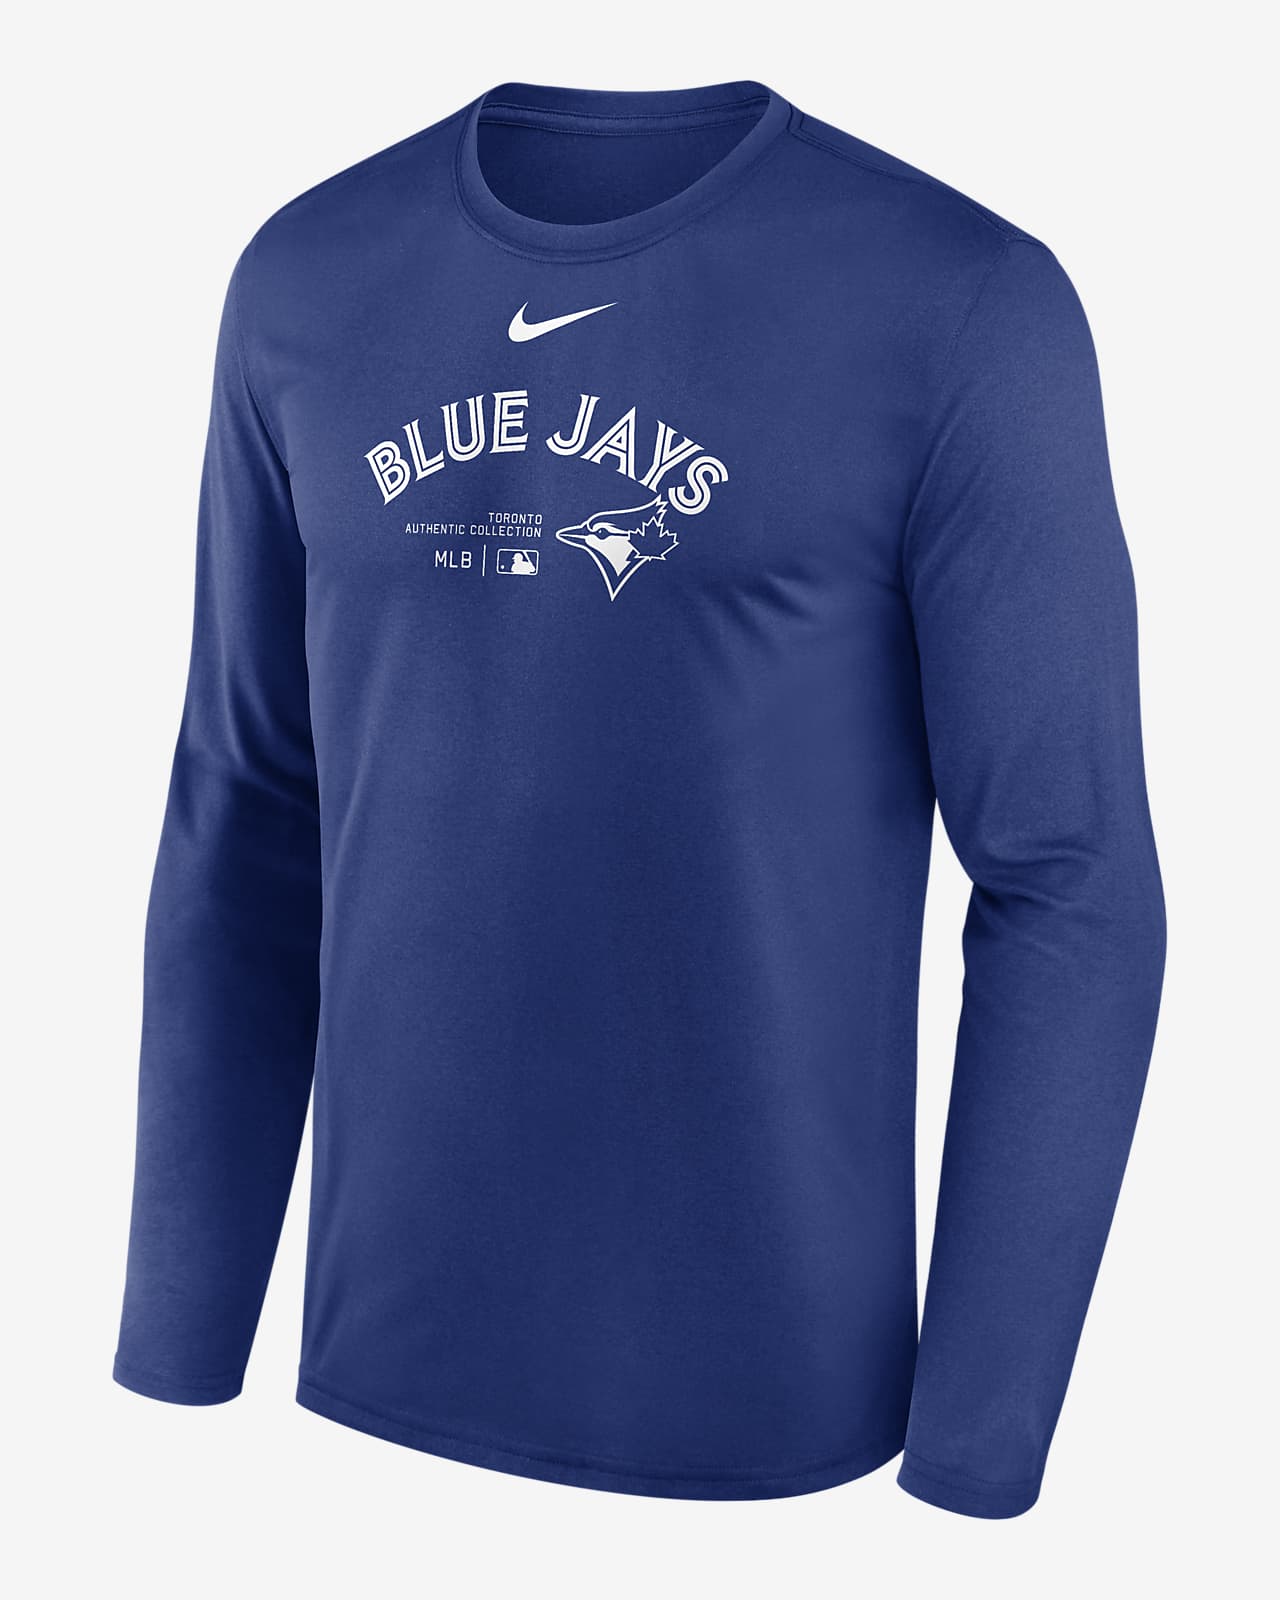 Bluejays tennis gifts